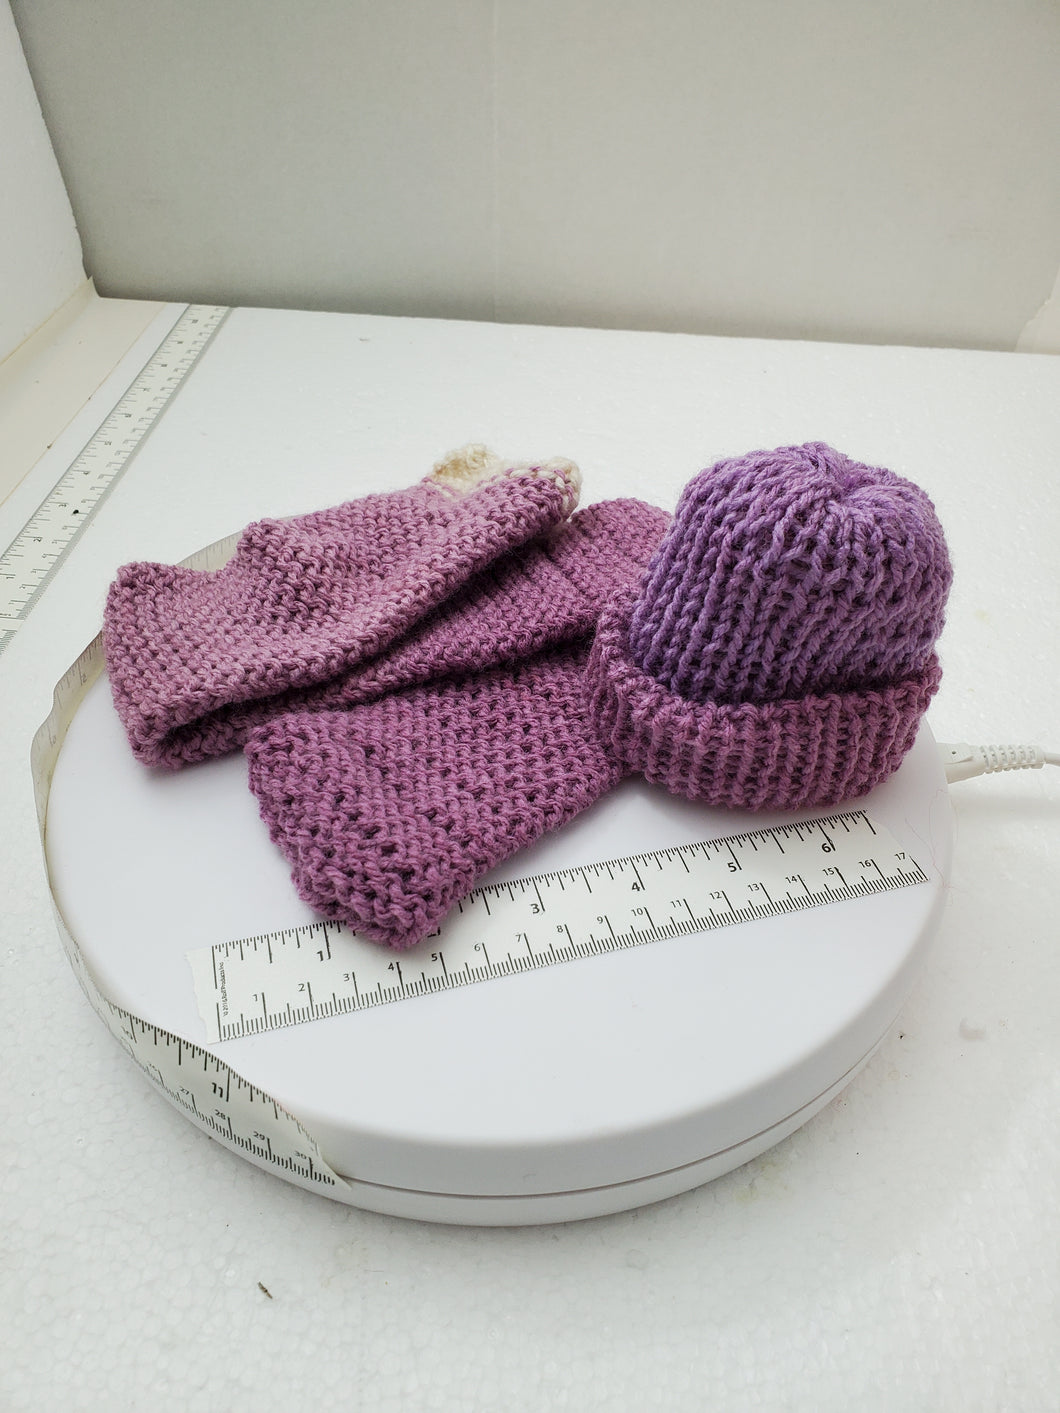 Knitted Hat and Scarf Set - Doll or Stuffed Animal Size